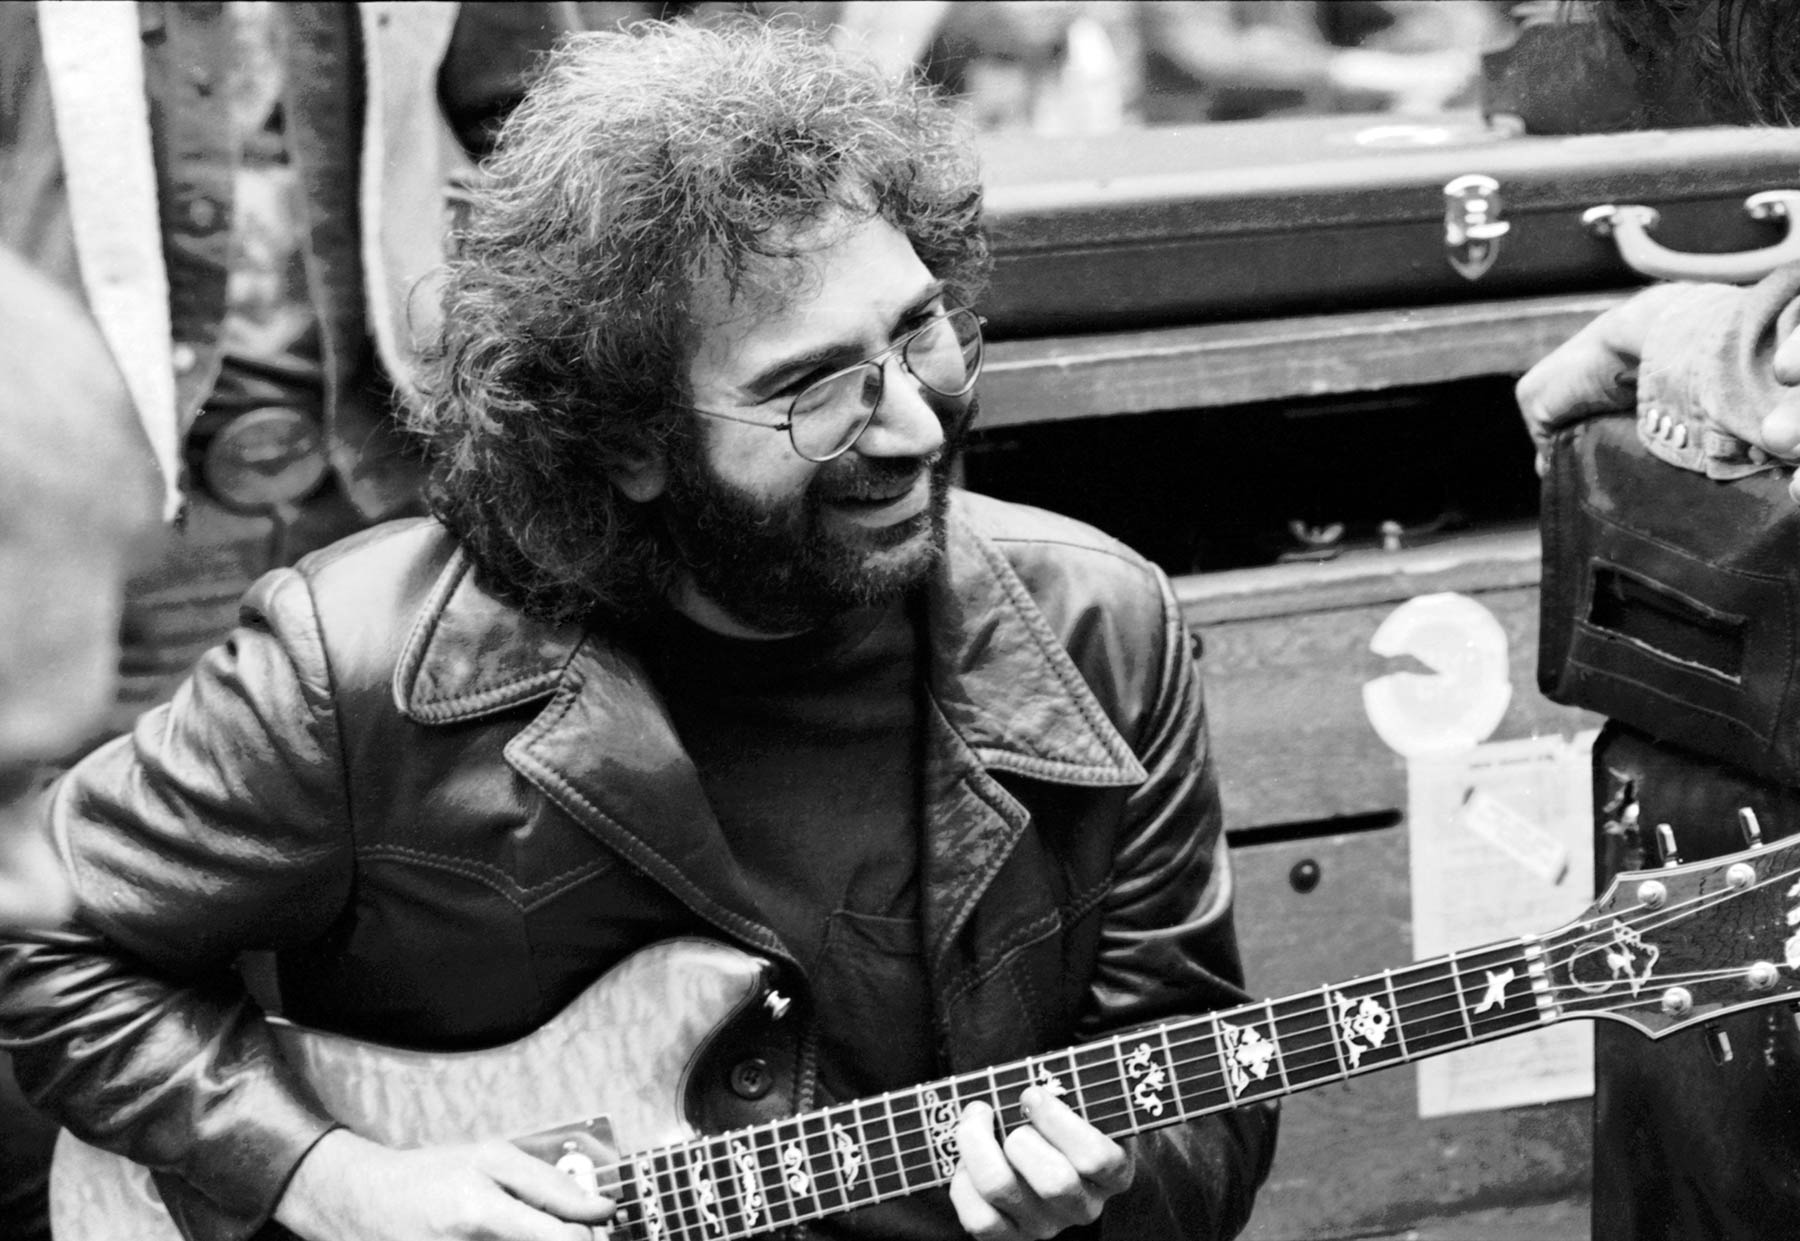 Jerry Garcia appears in Long Strange Trip by Amir Bar-Lev, an official selection of the Documentary Premieres program at the 2017 Sundance Film Festival. Courtesy of Sundance Institute | photo by Roberto Rabanne.